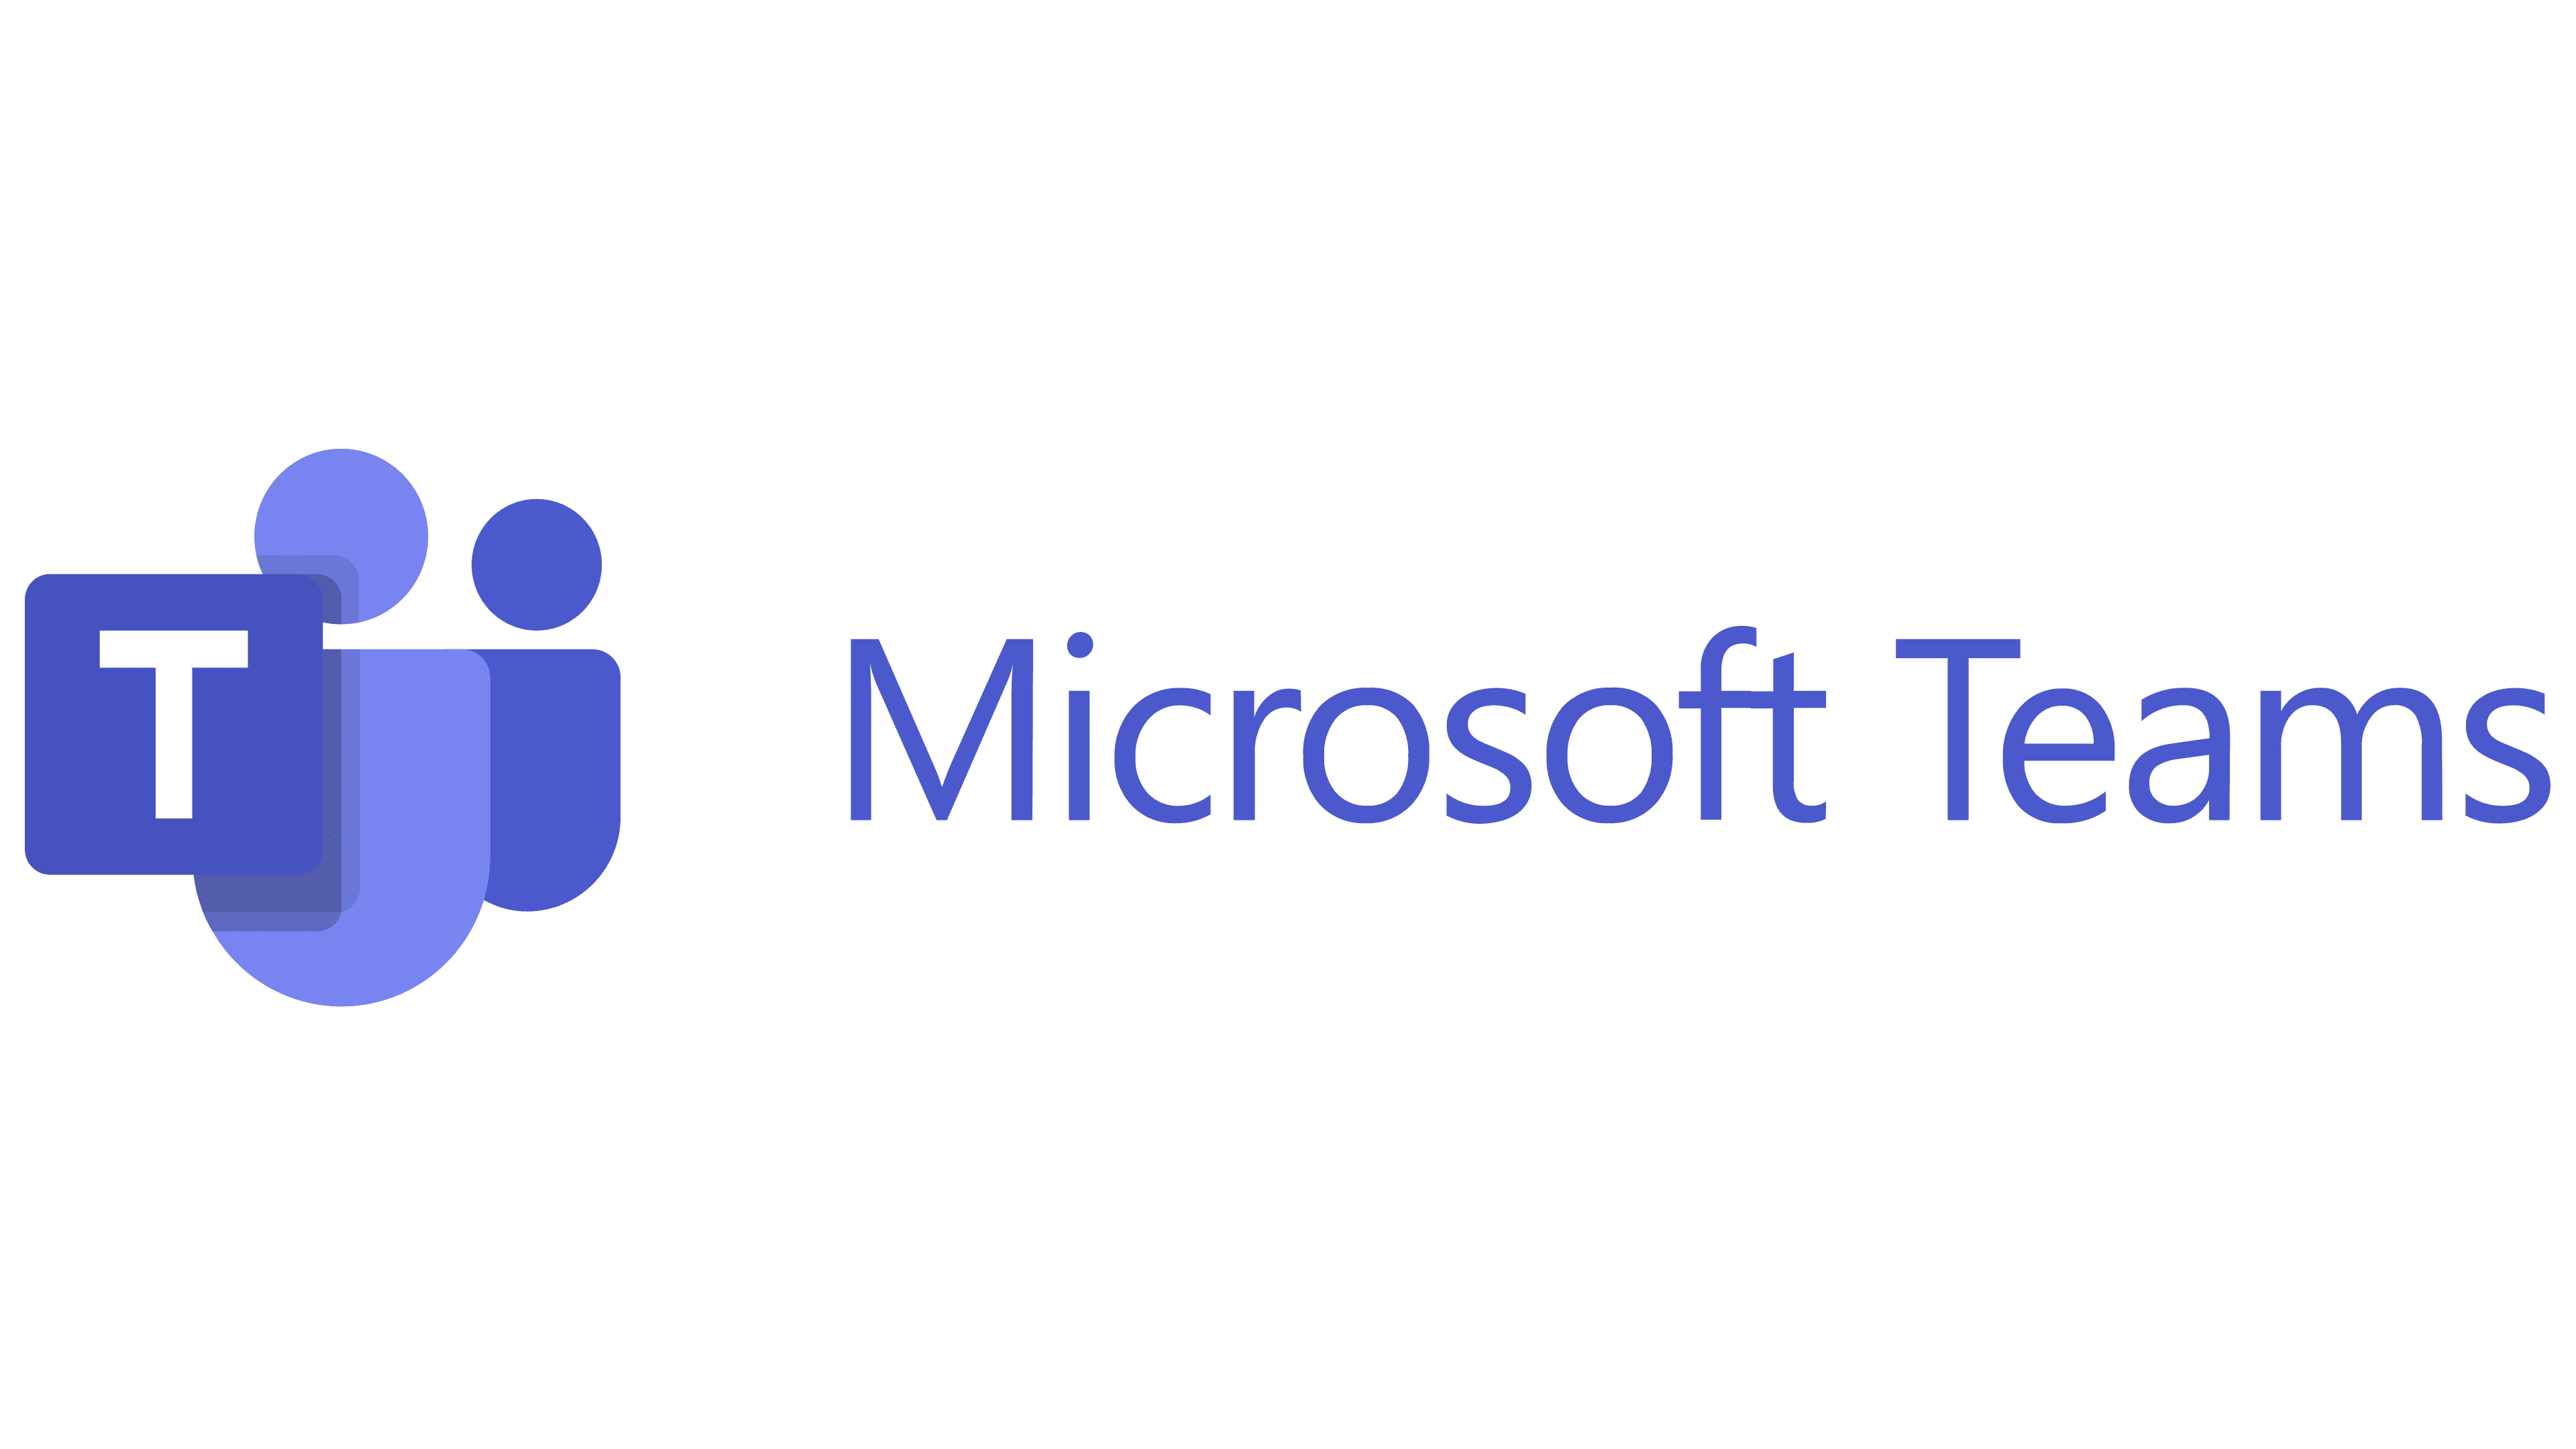 Microsoft will replace Forms app with Polls in Teams meetings this year